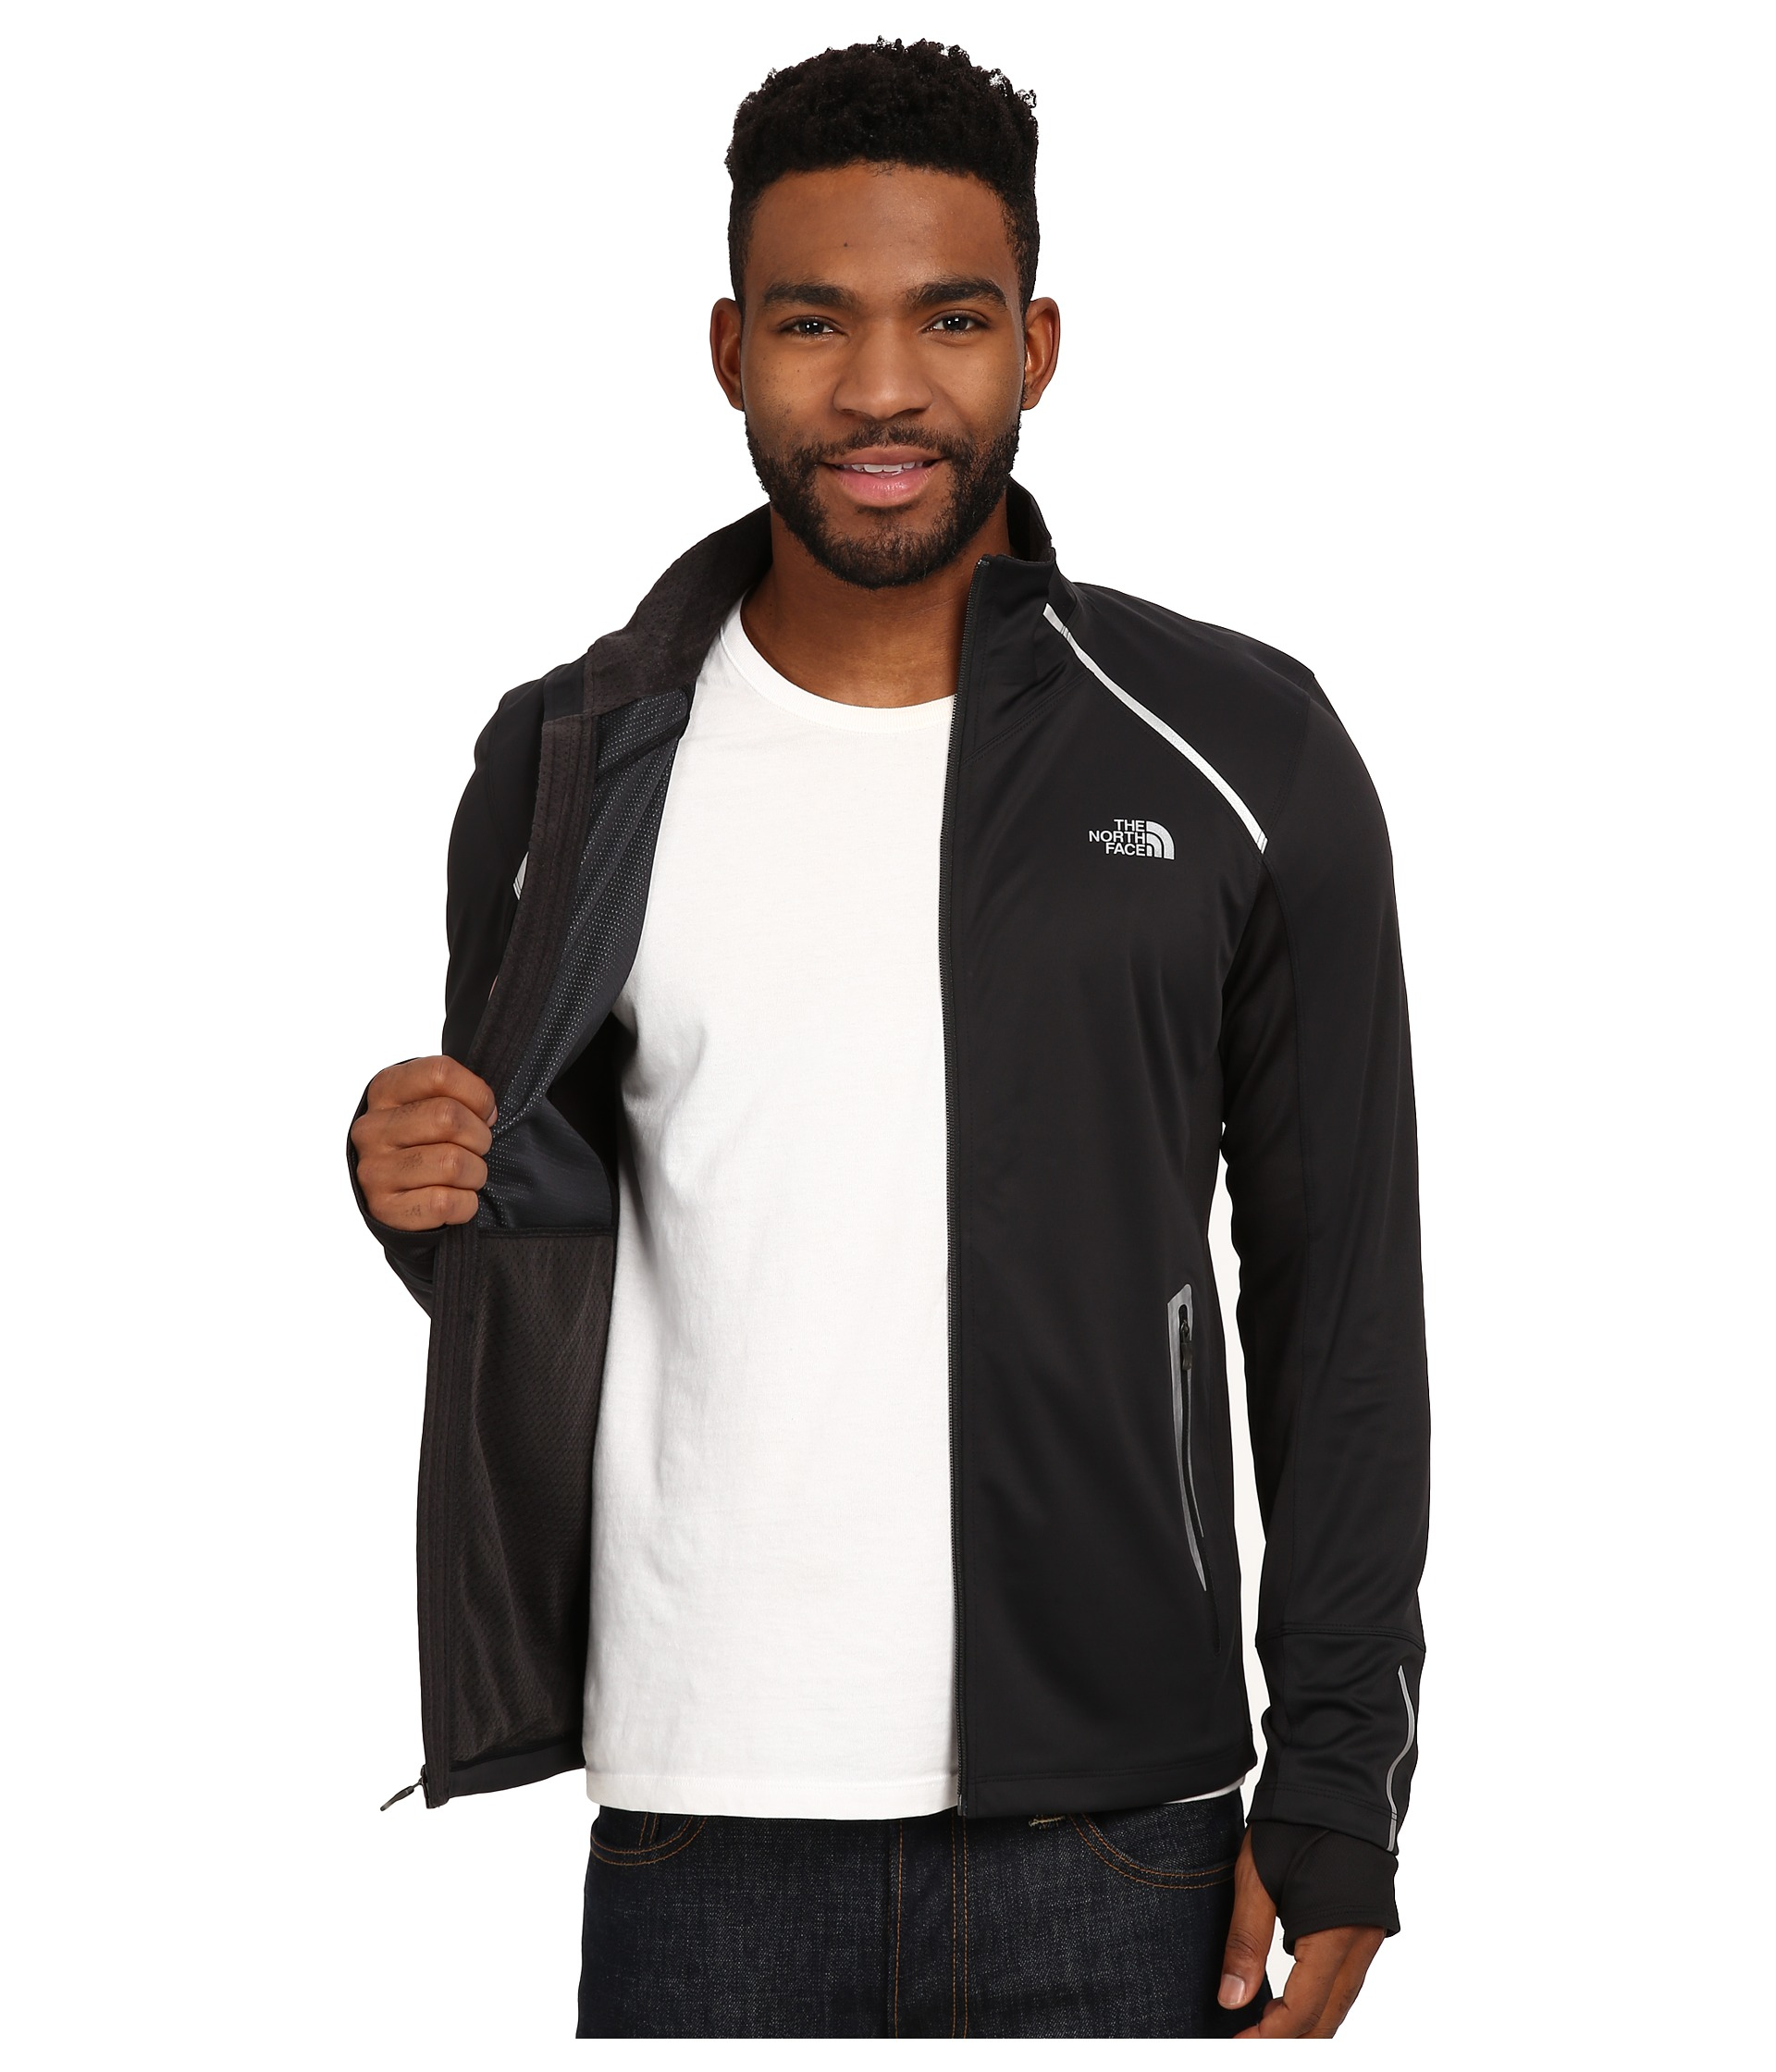 north face isotherm jacket